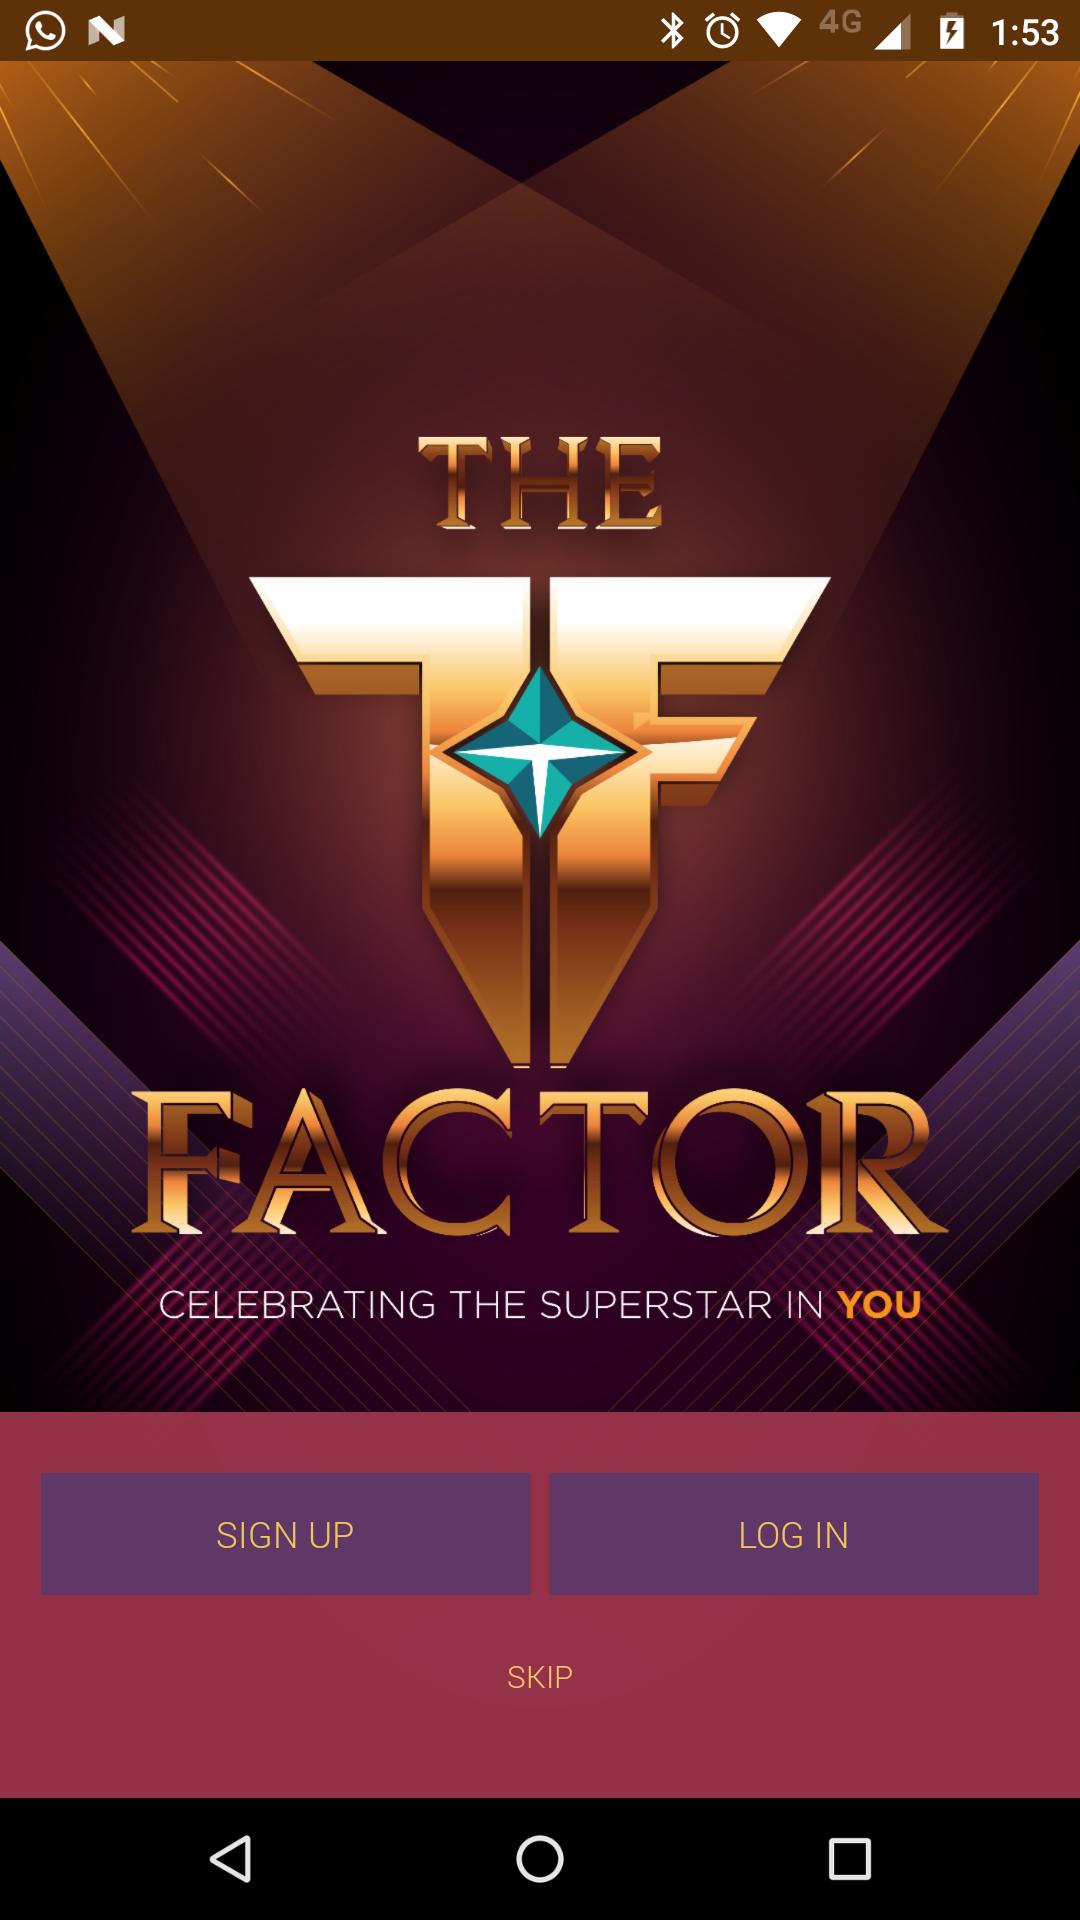 The T Factor